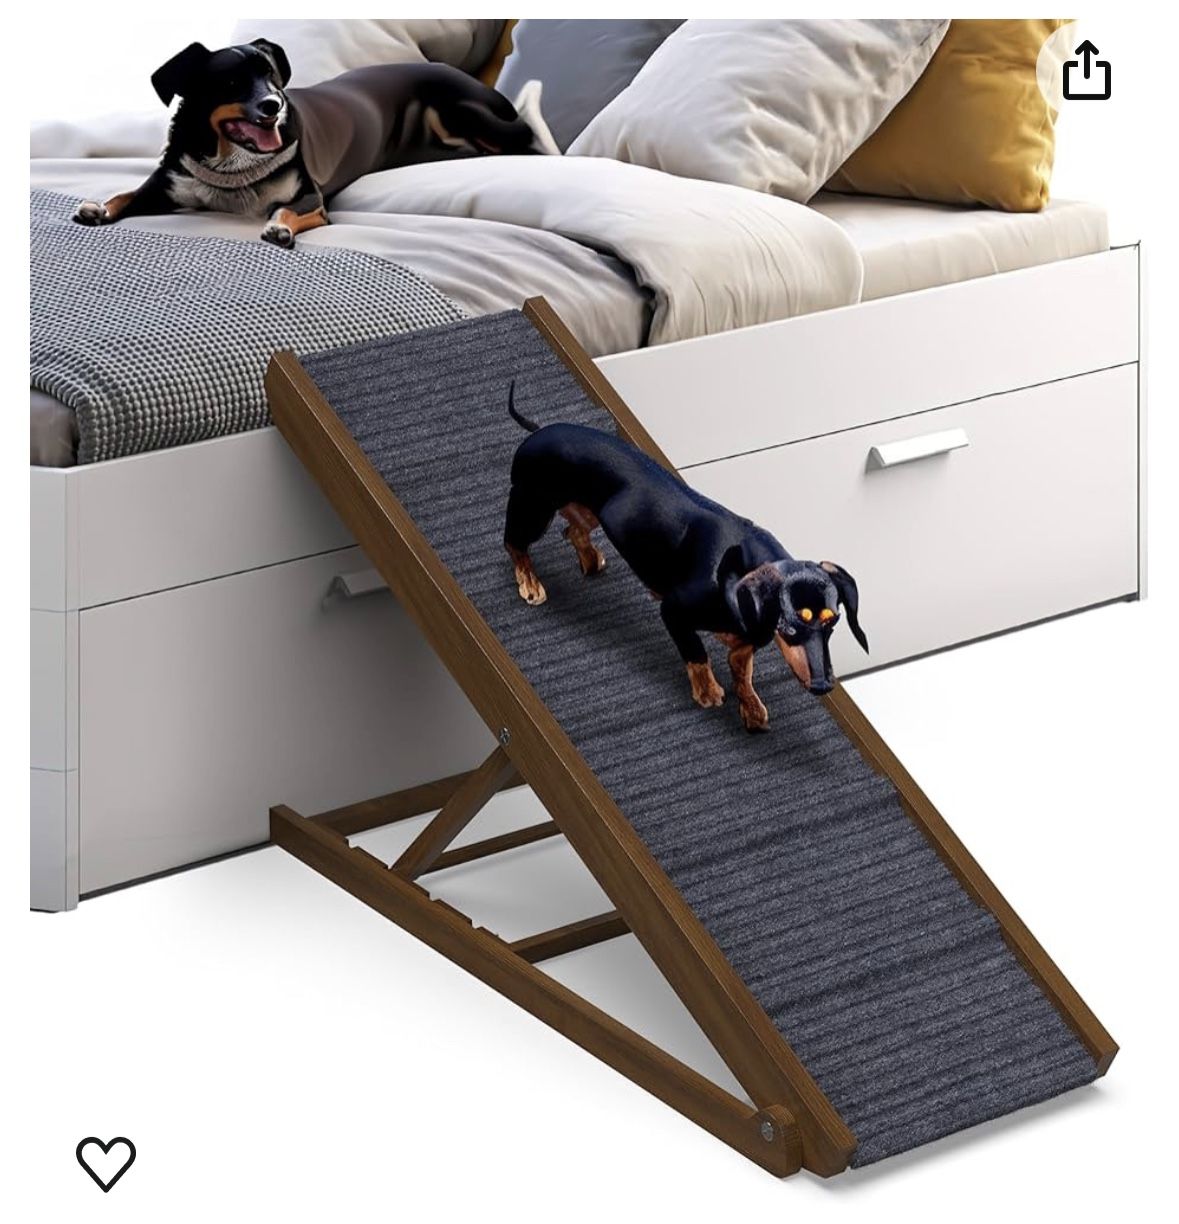 Dog Ramp for Bed Small Dog to Large Dog - Portable Ramp for Dogs, Folding Dog Ramp for All Breeds - Adjustable Wooden Dog Ramp for Couch, Car Sofa (Wa